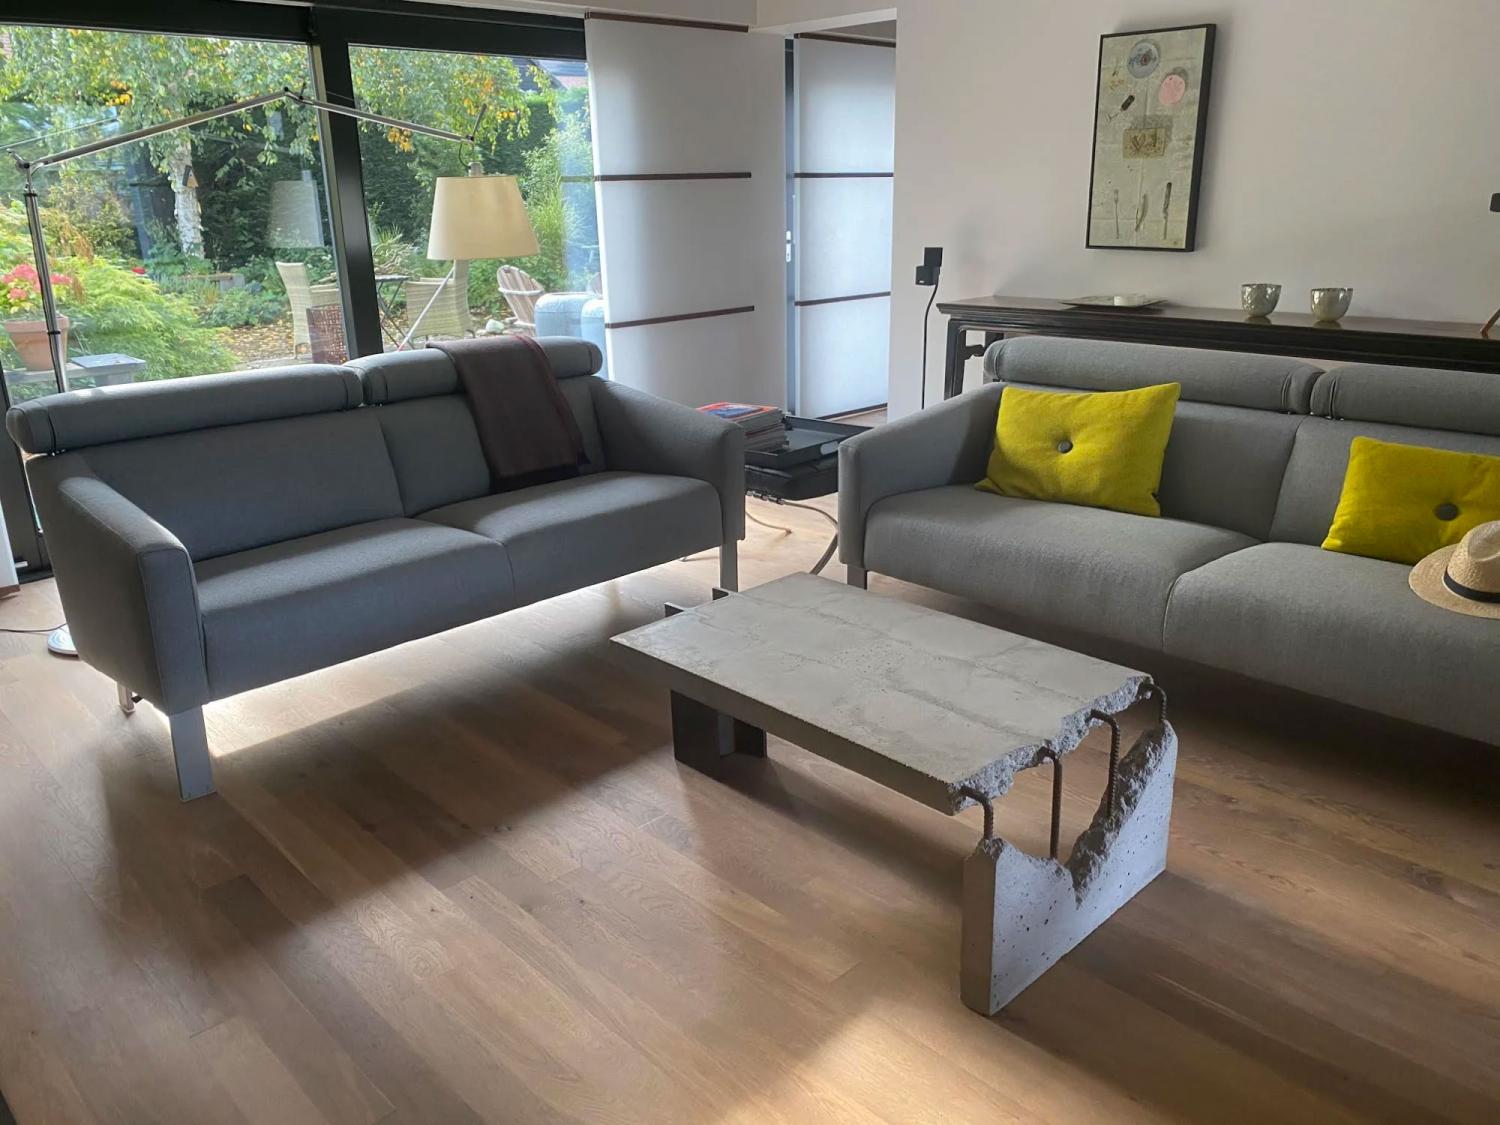 White-grey ceramic concrete coffee table with two grey sofa on a wooden floor